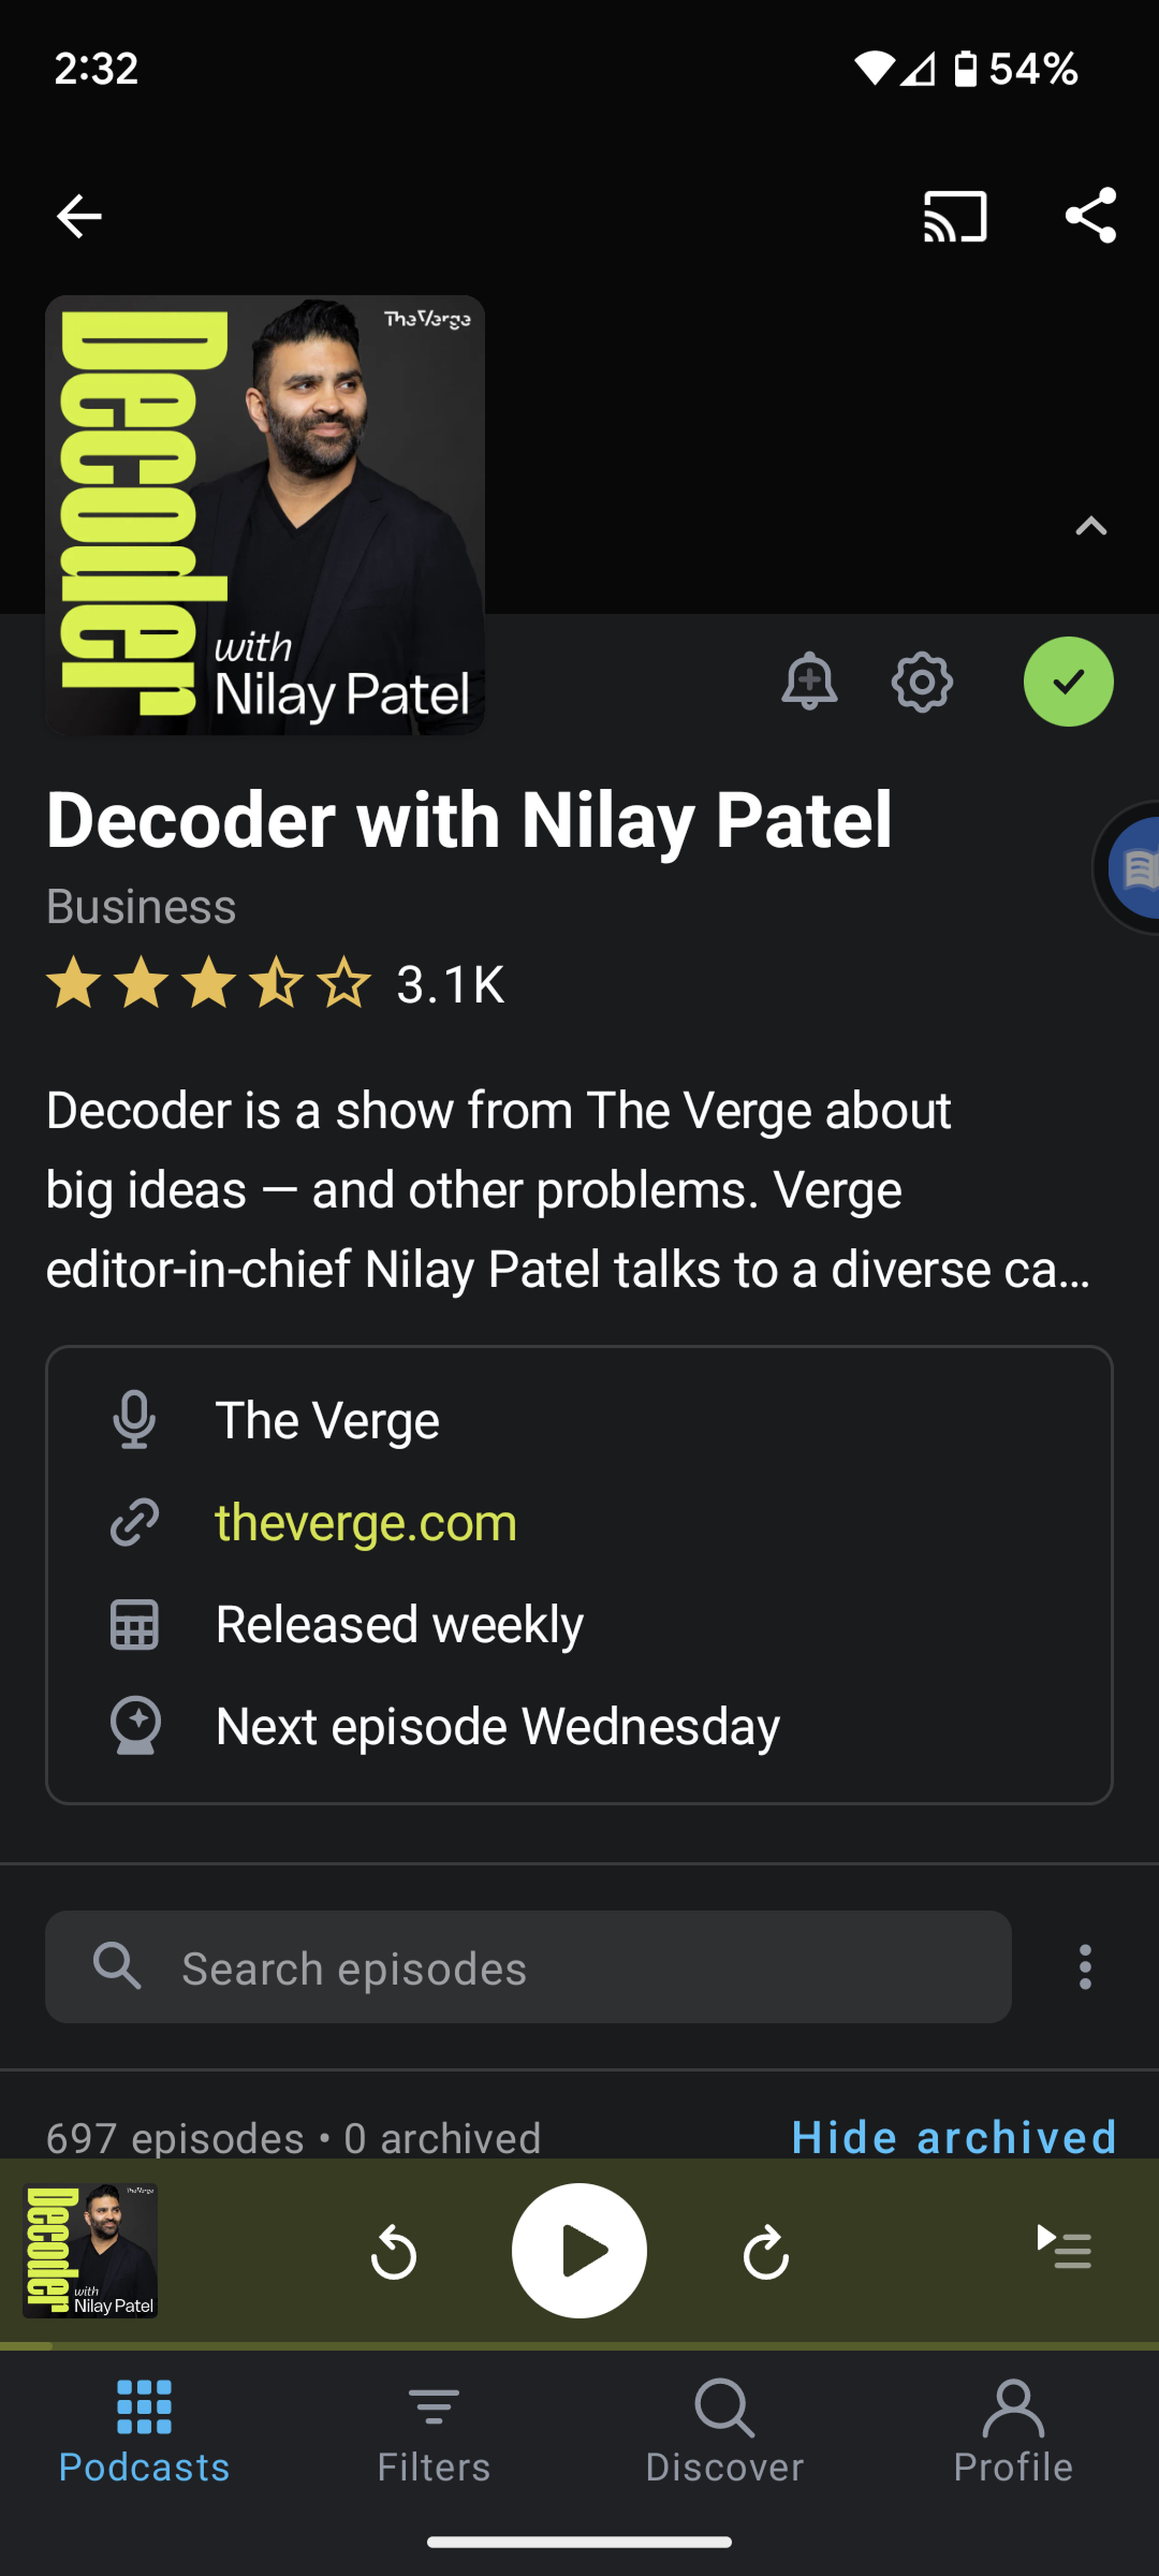 Podcast page for Decoder with Nilay Patel with album cover on top and play controls at bottom.